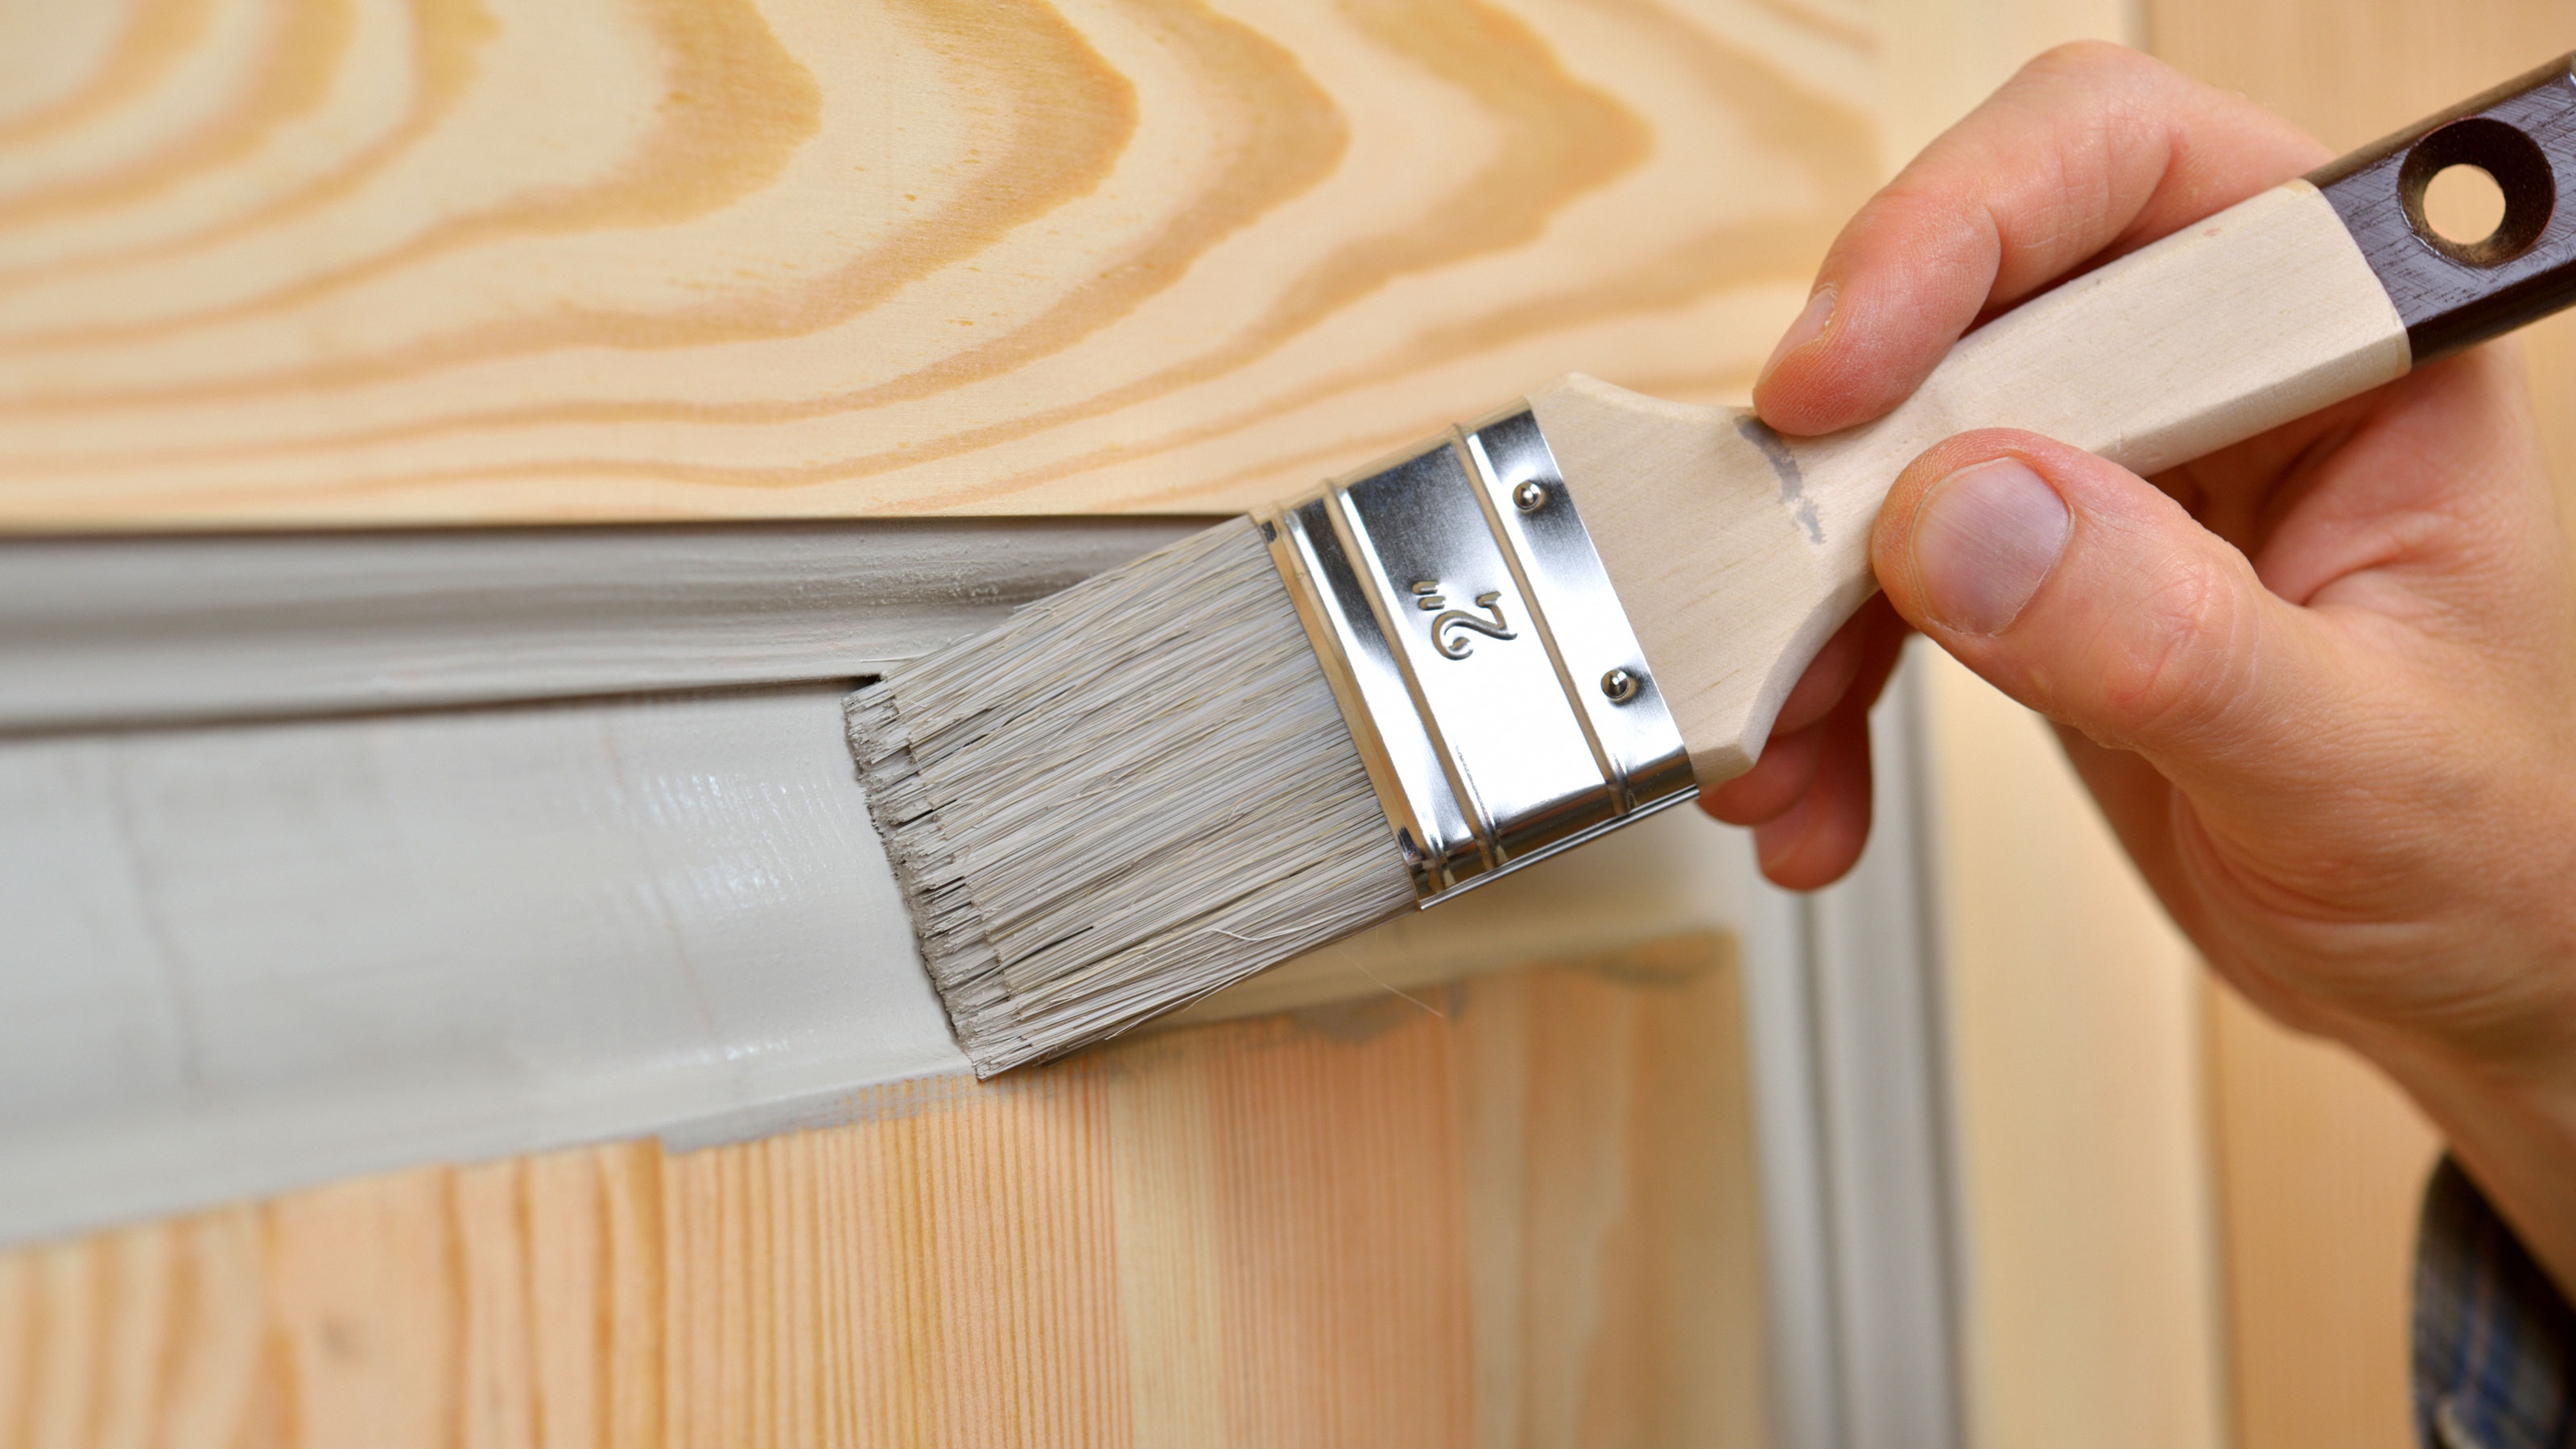 Professional painters agree this is the best way to paint doors for an expert flawless finish